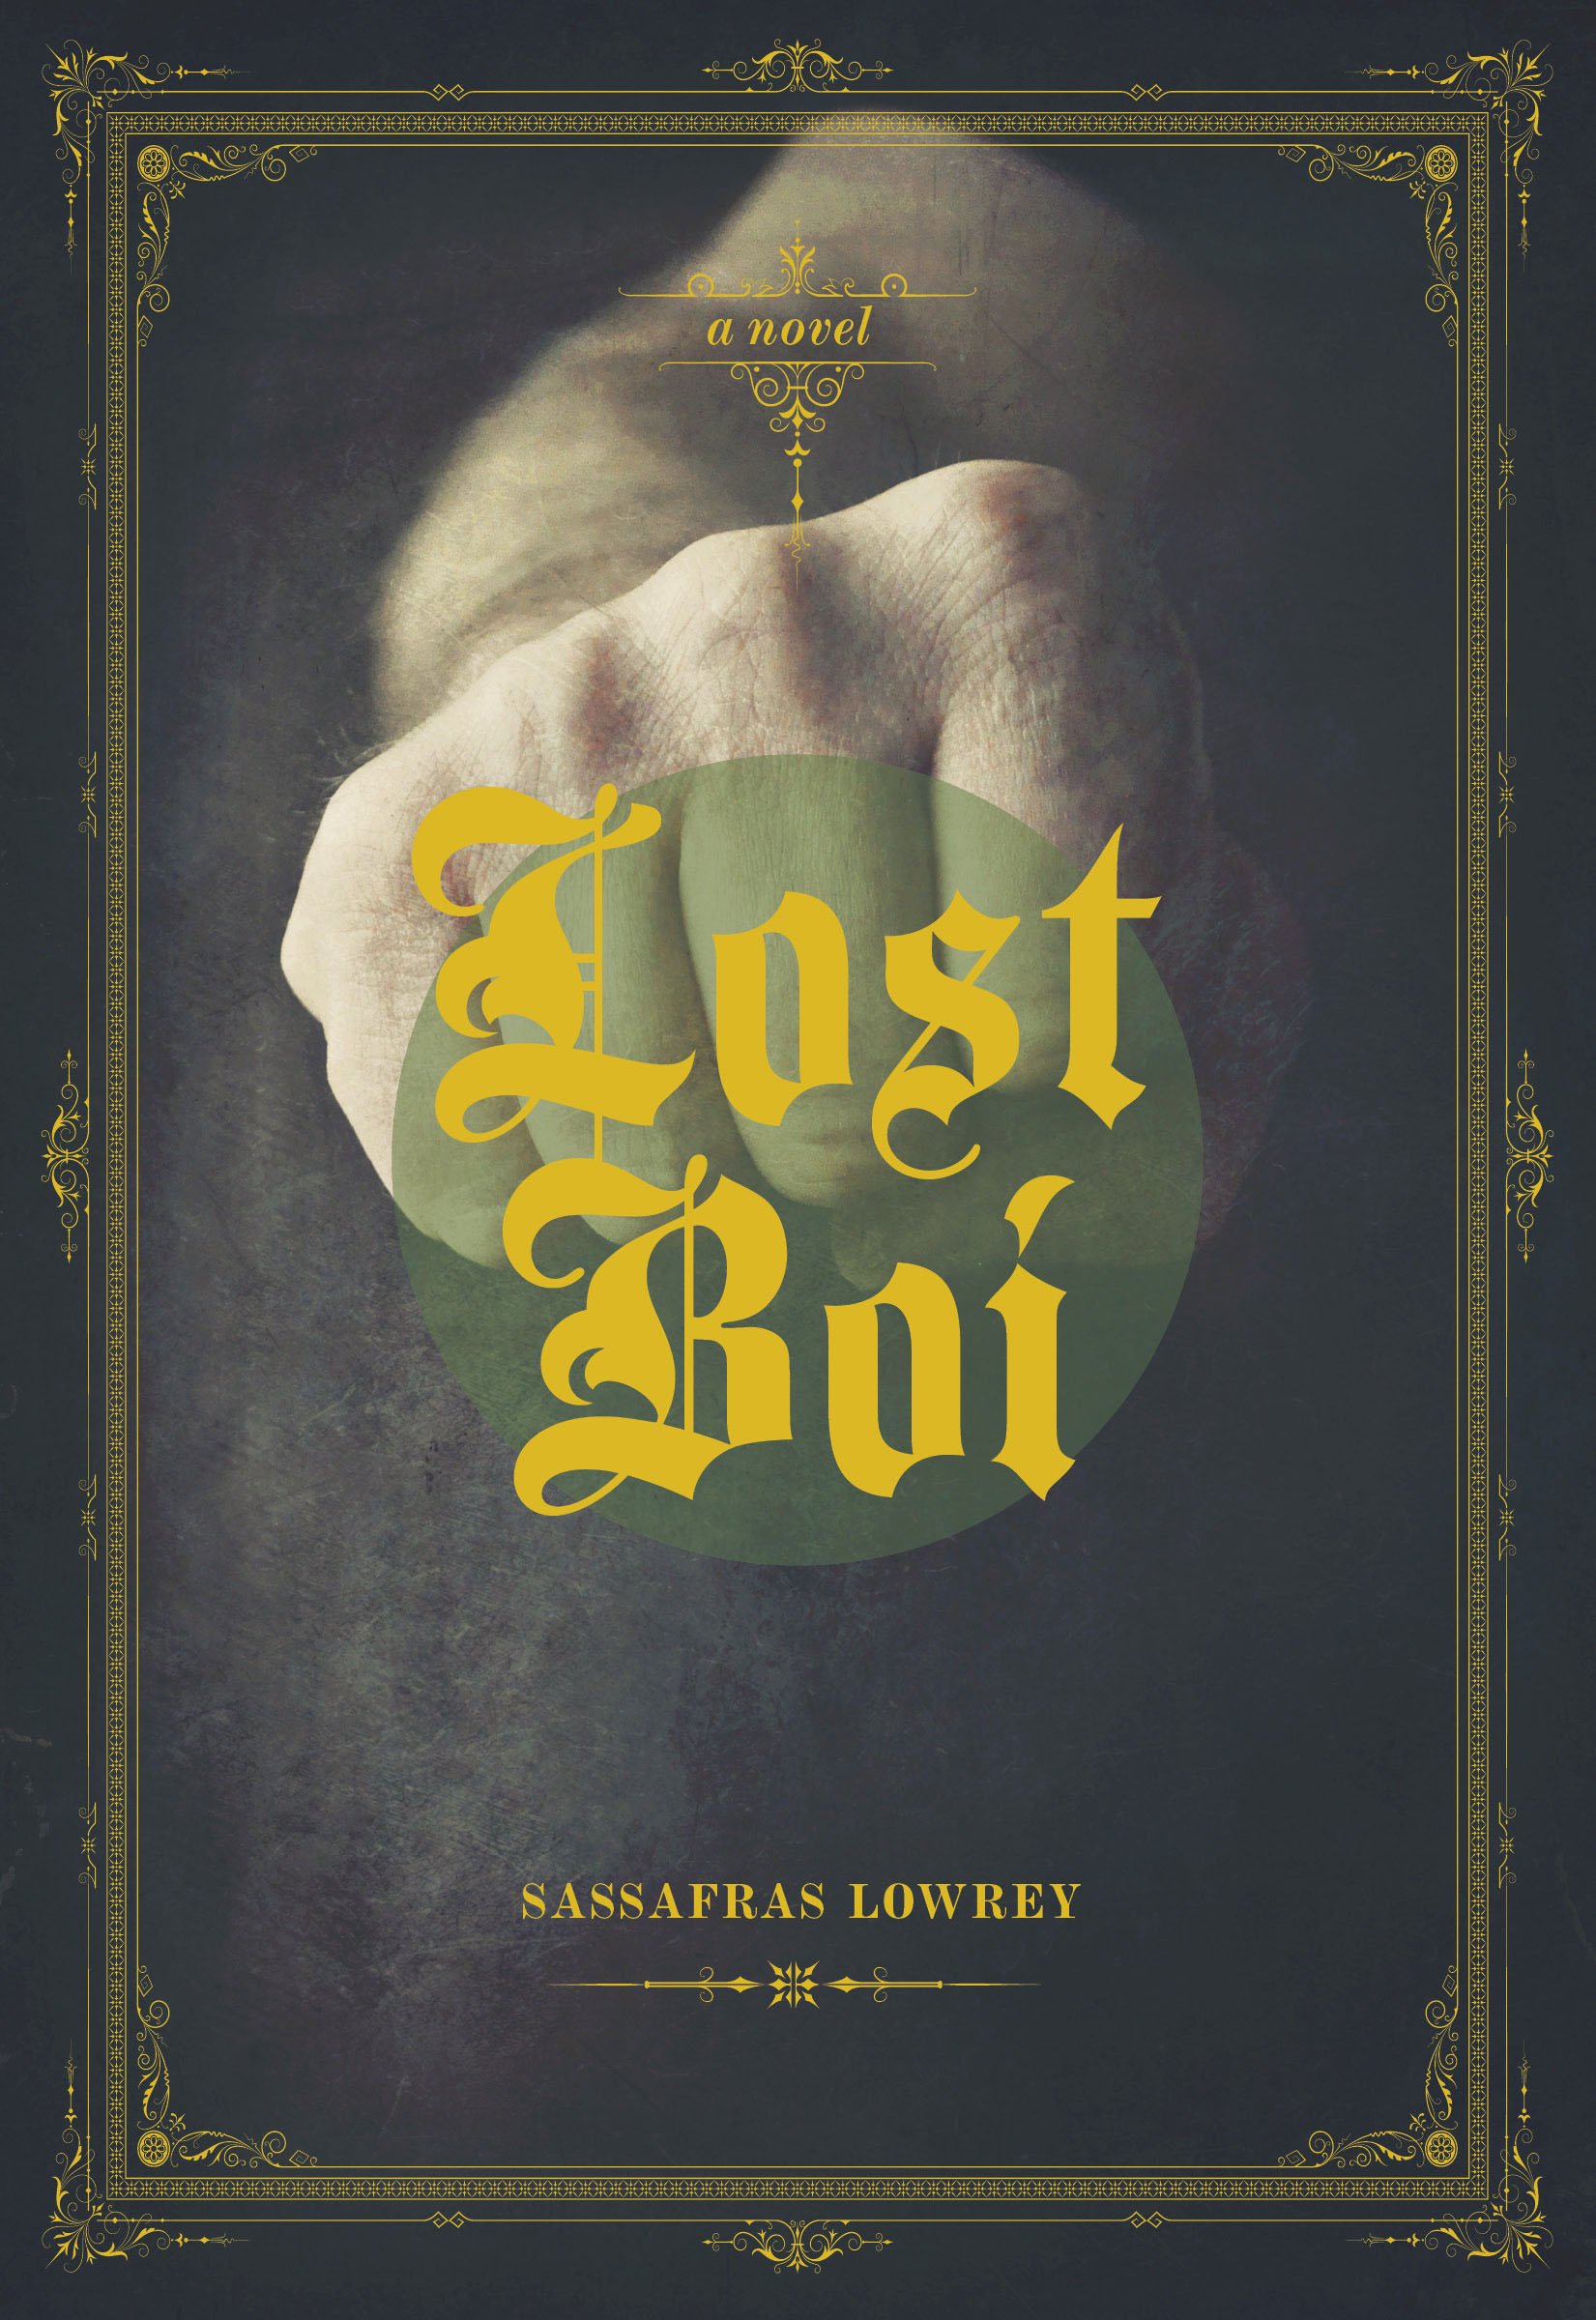 Cover of Lost Boi by Sassafrass Lowrey